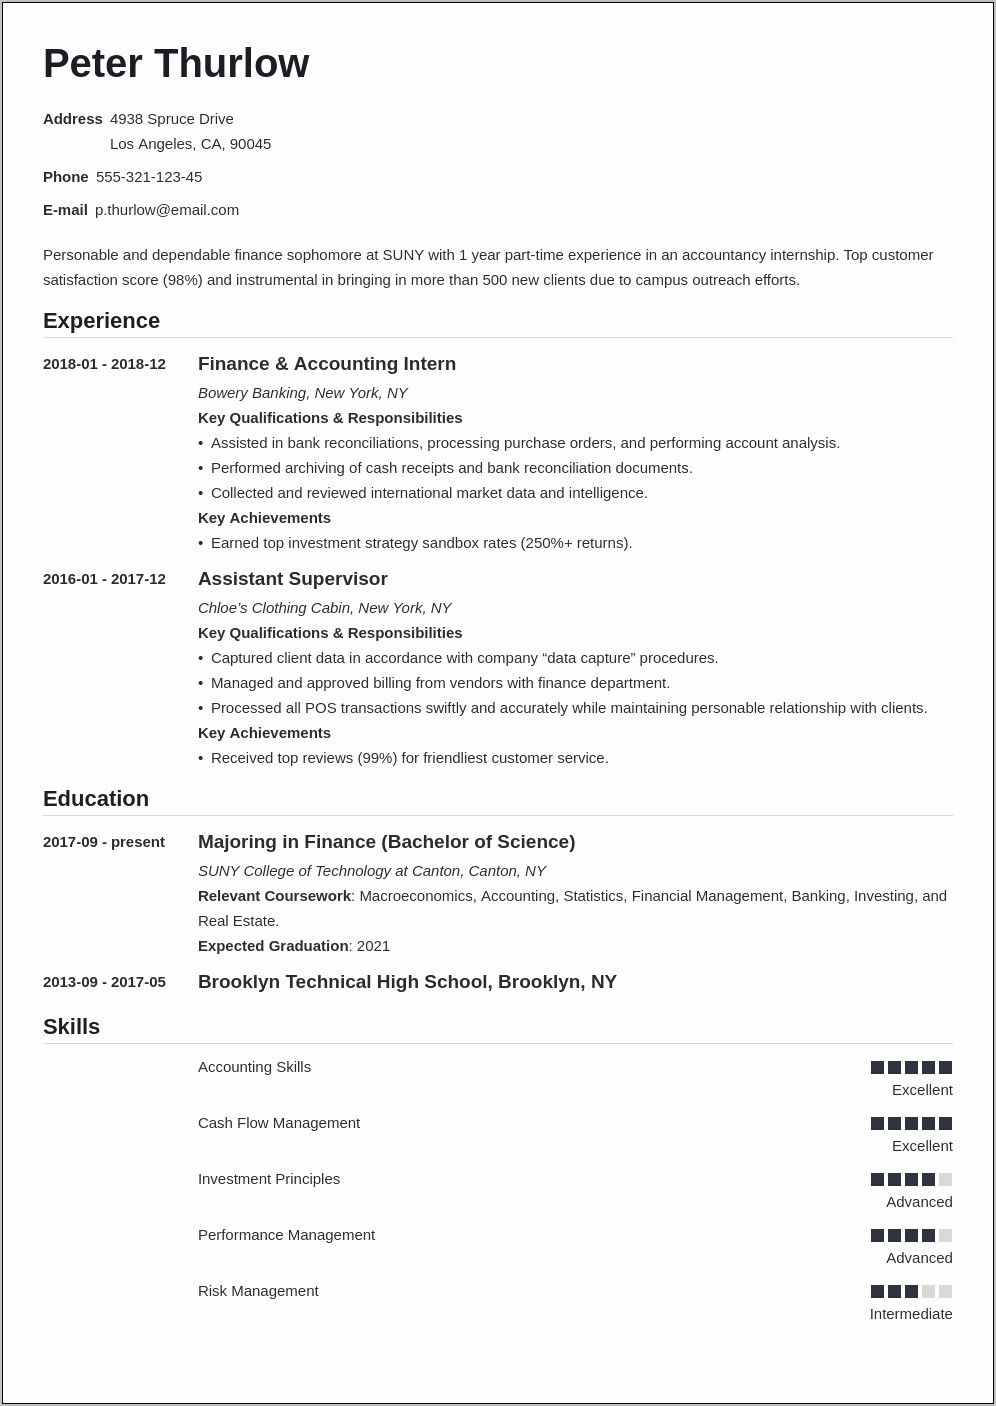 Resume For Intership Past Jobs